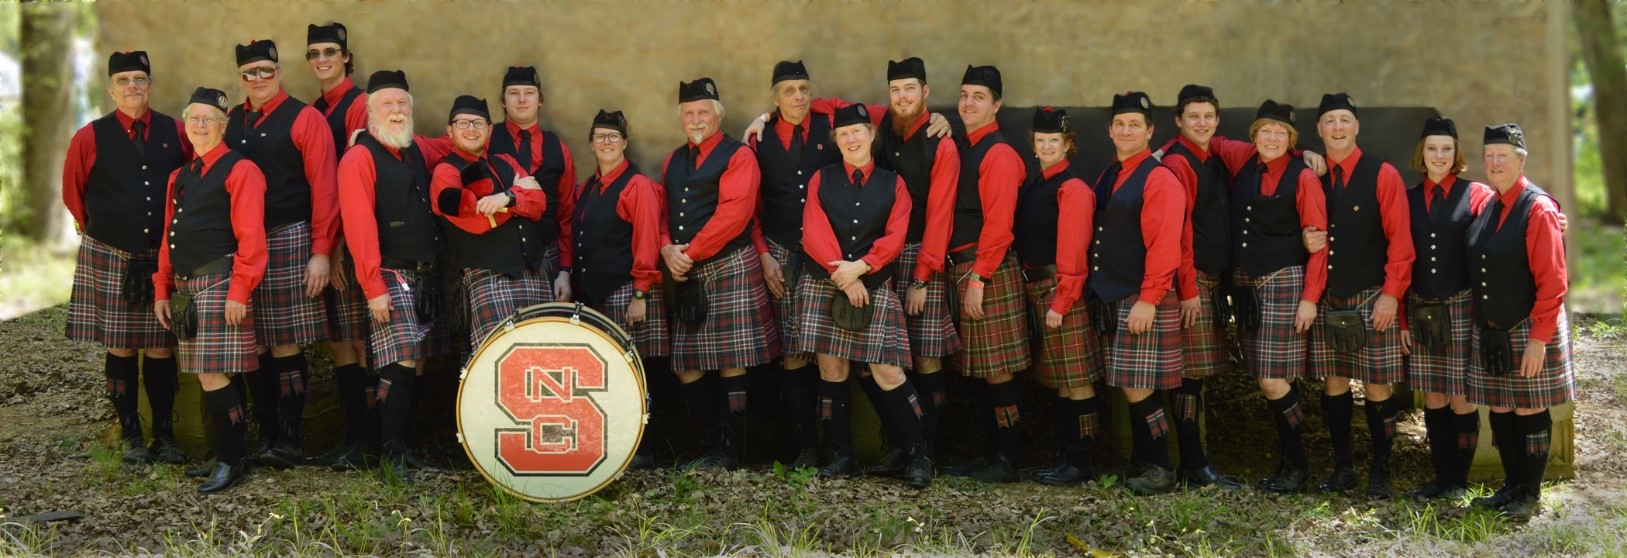 NC State University Pipe and Drum Band